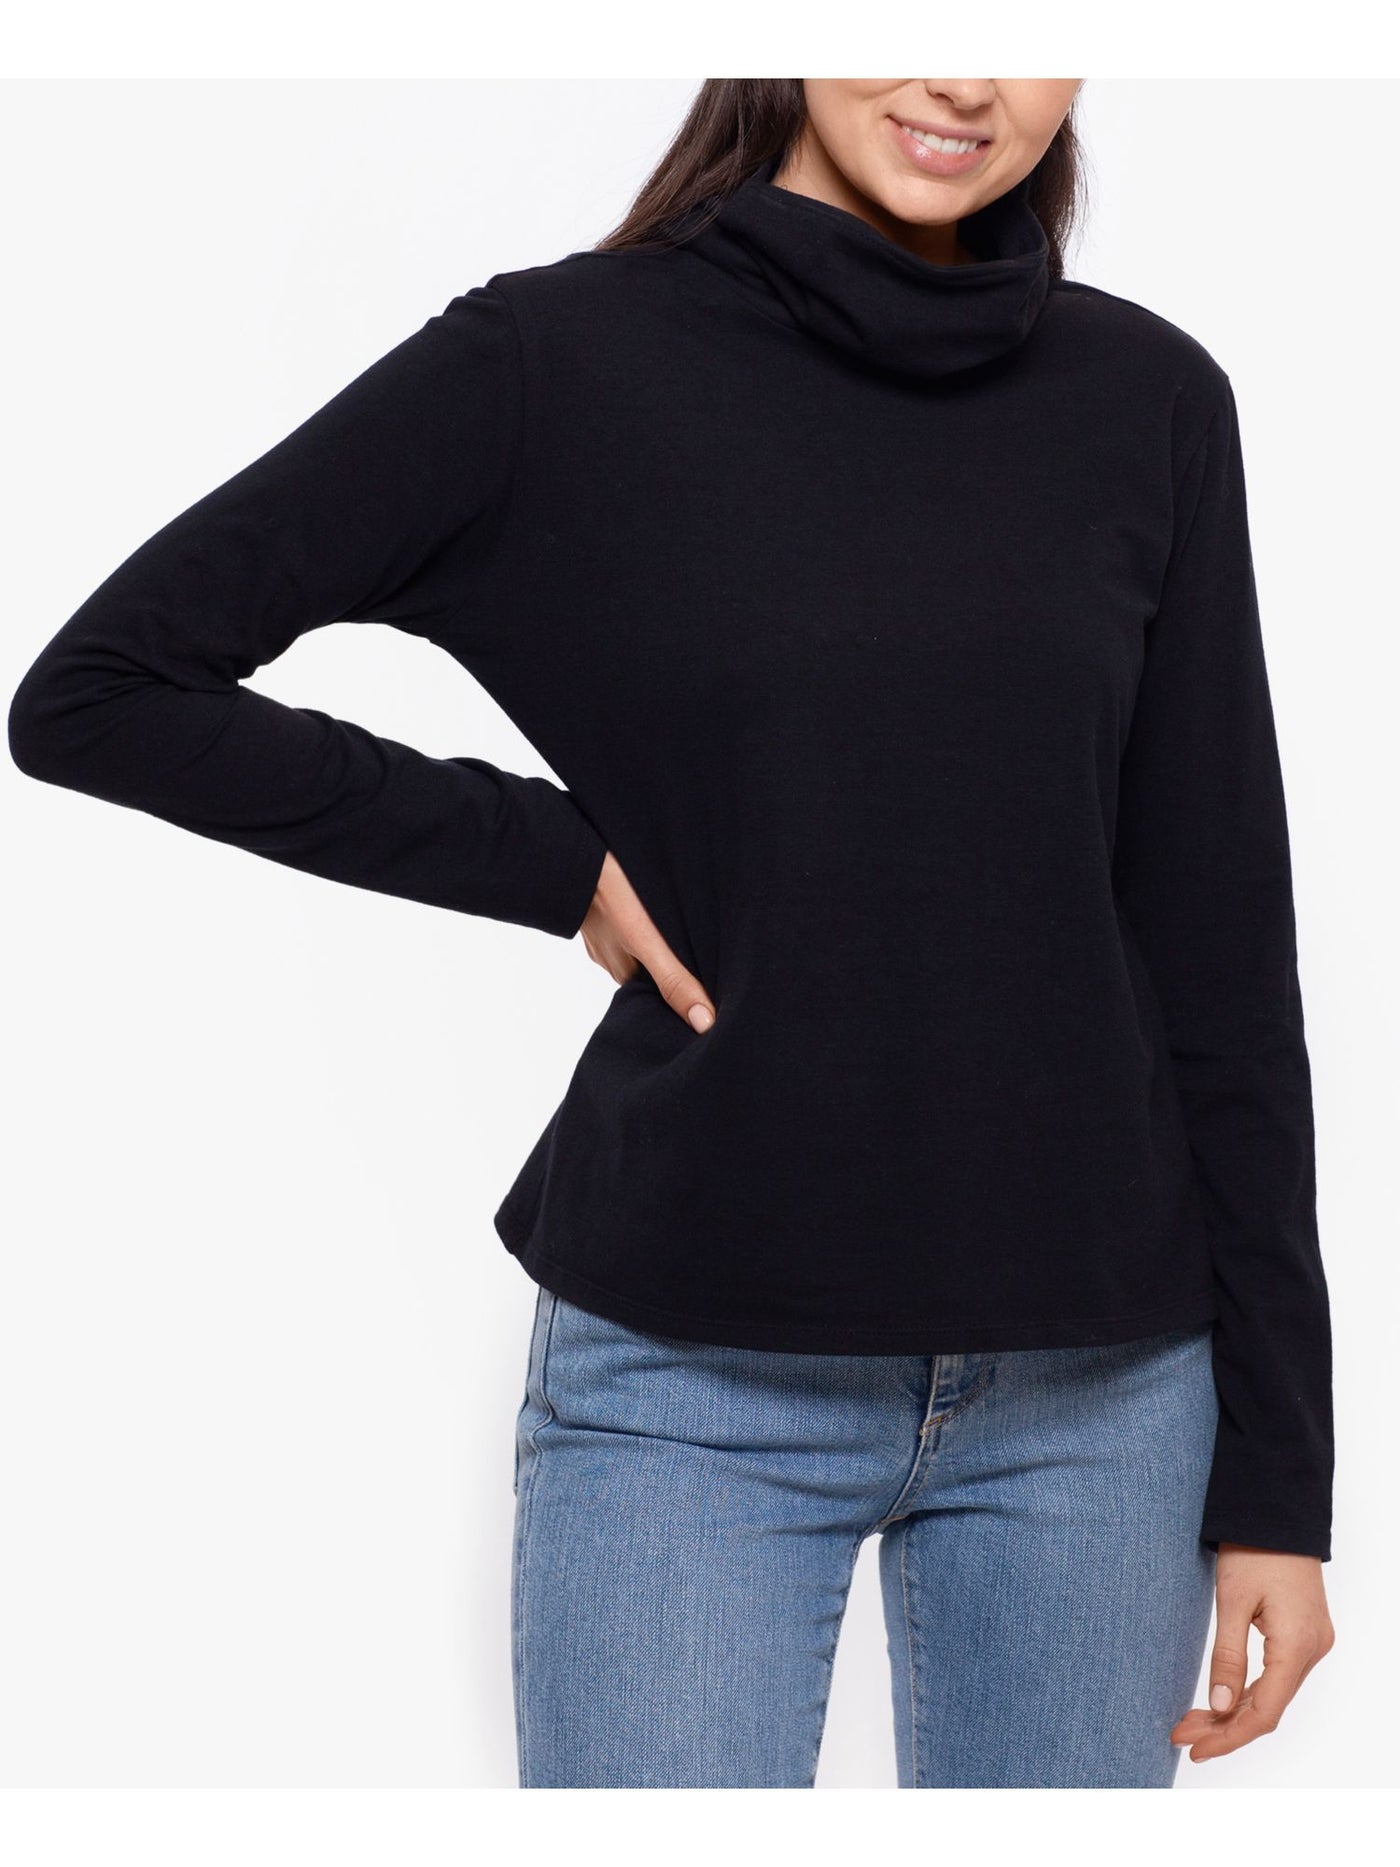 BAM BY BETSY & ADAM Womens Black Cotton Blend Long Sleeve Turtle Neck Top XS